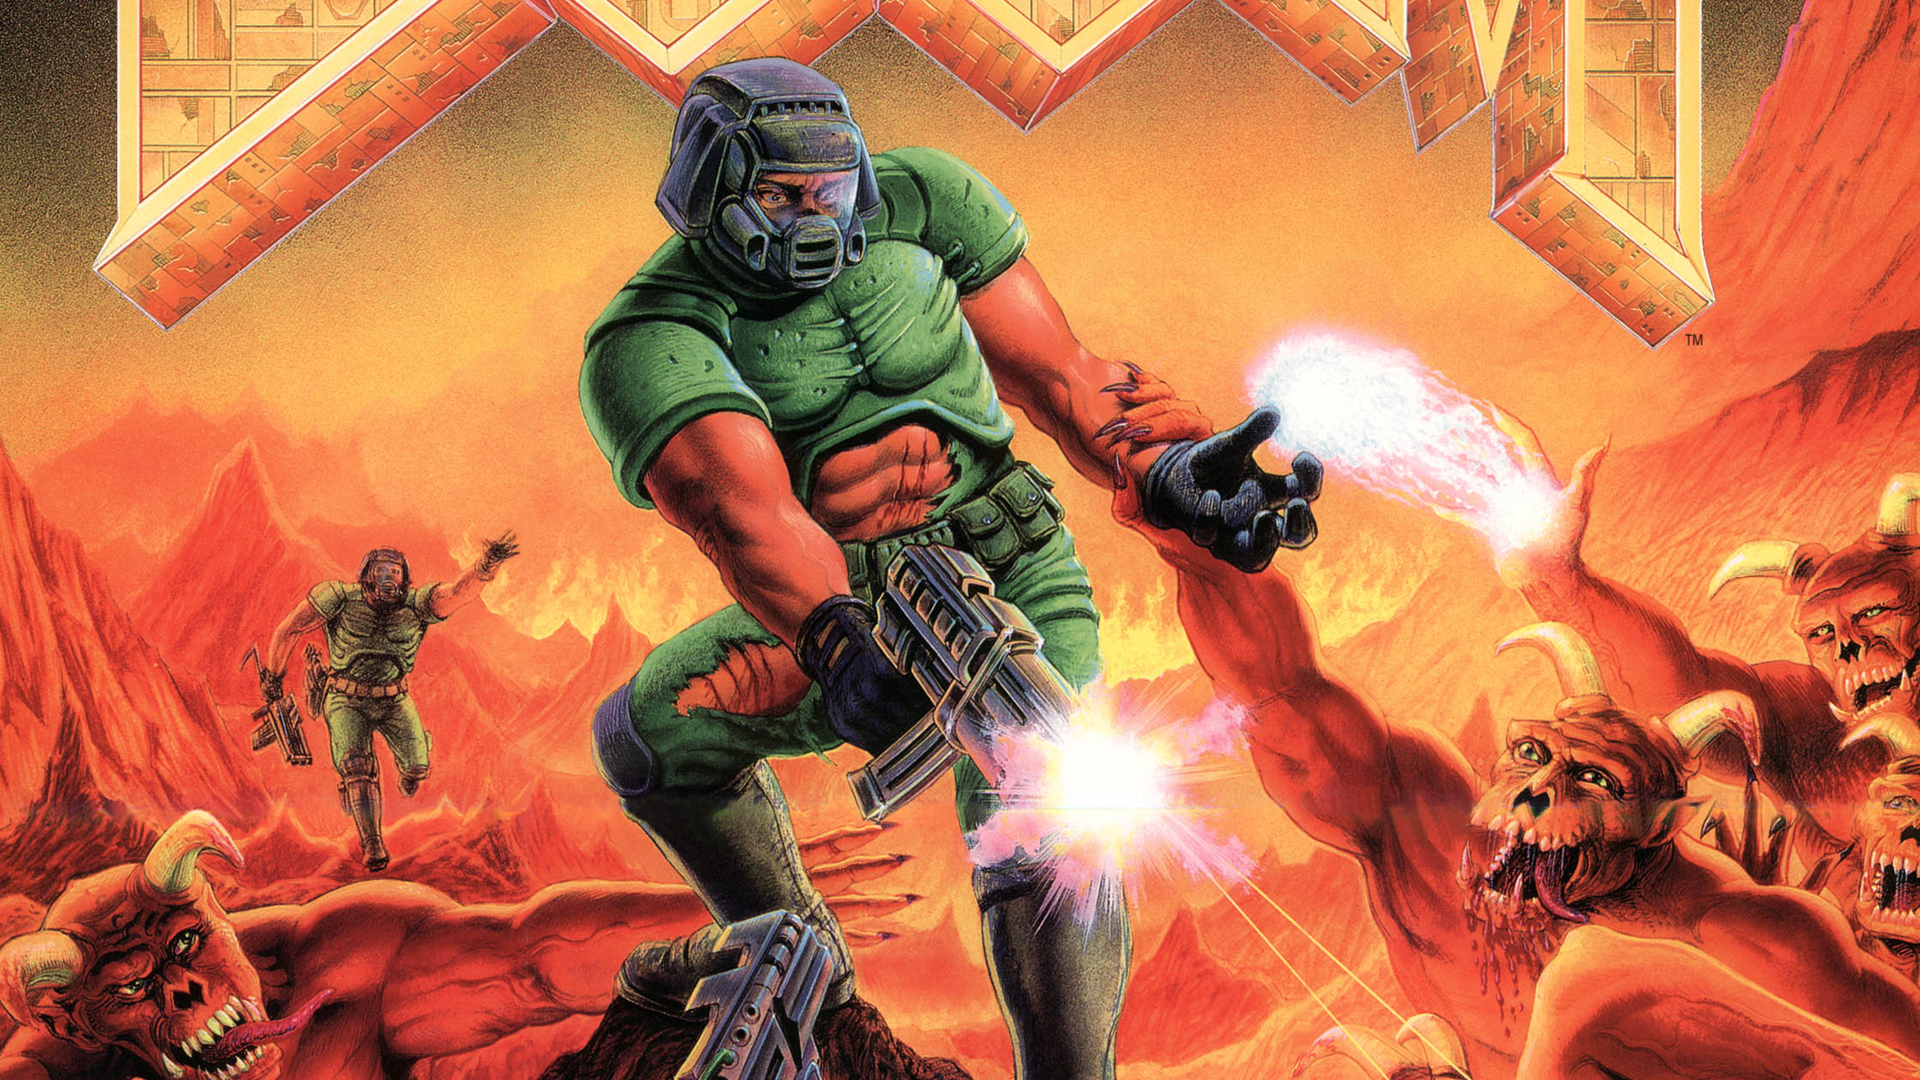  Software dev joins ranks of history's greatest monsters by adding microtransactions to the original Doom 